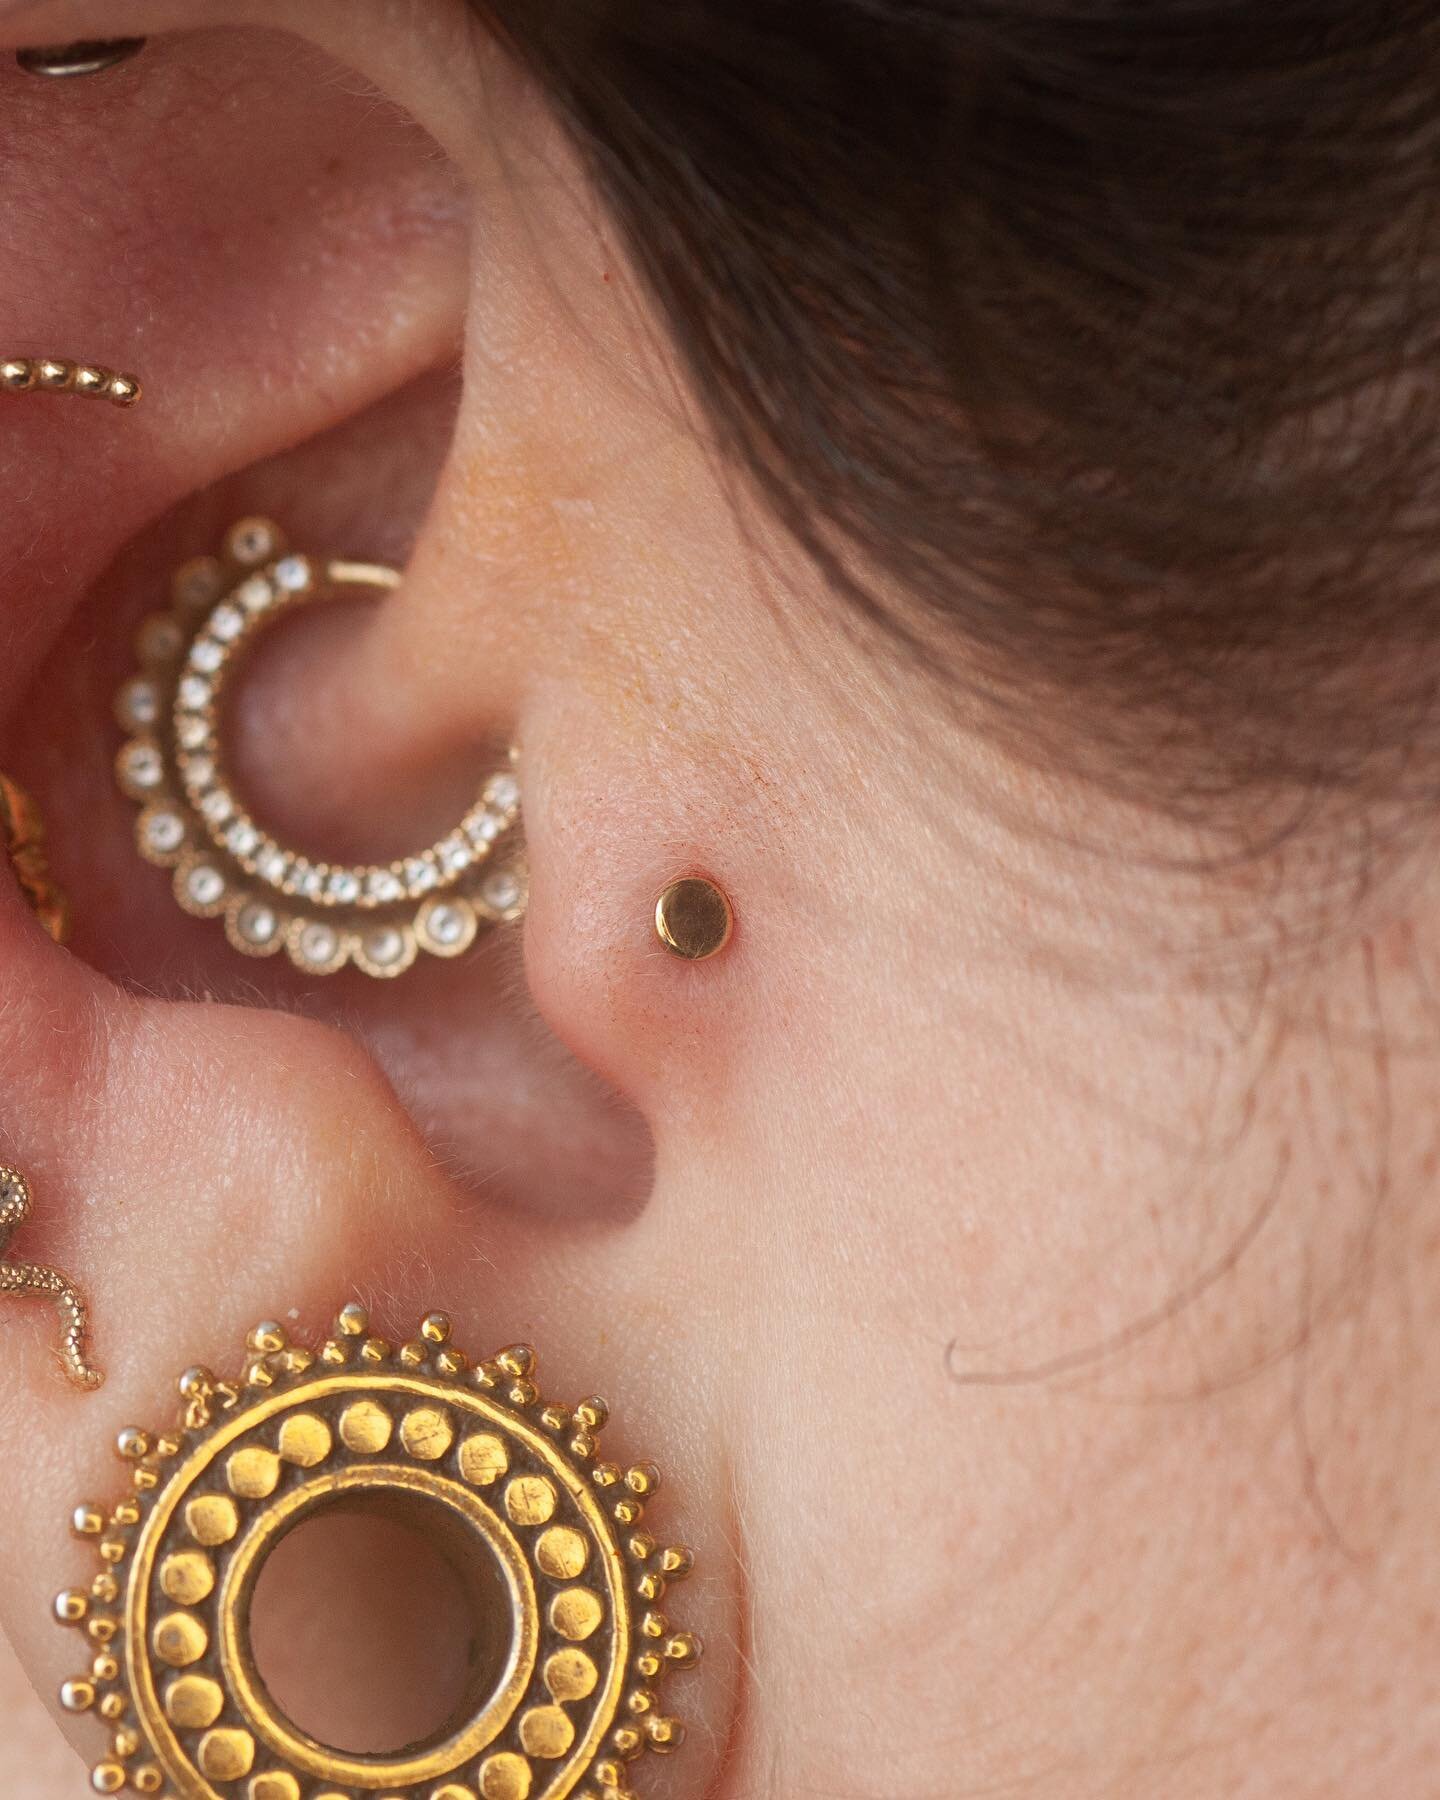 My sweet pal @booksandbadassery came in and let me pick some empty spots for new cuties! Fresh tragus using a @bodygems high polish gold disc, and a fresh conch using an @anatometalinc &lsquo;Ferndale&rsquo;, all in yellow gold! ☀️